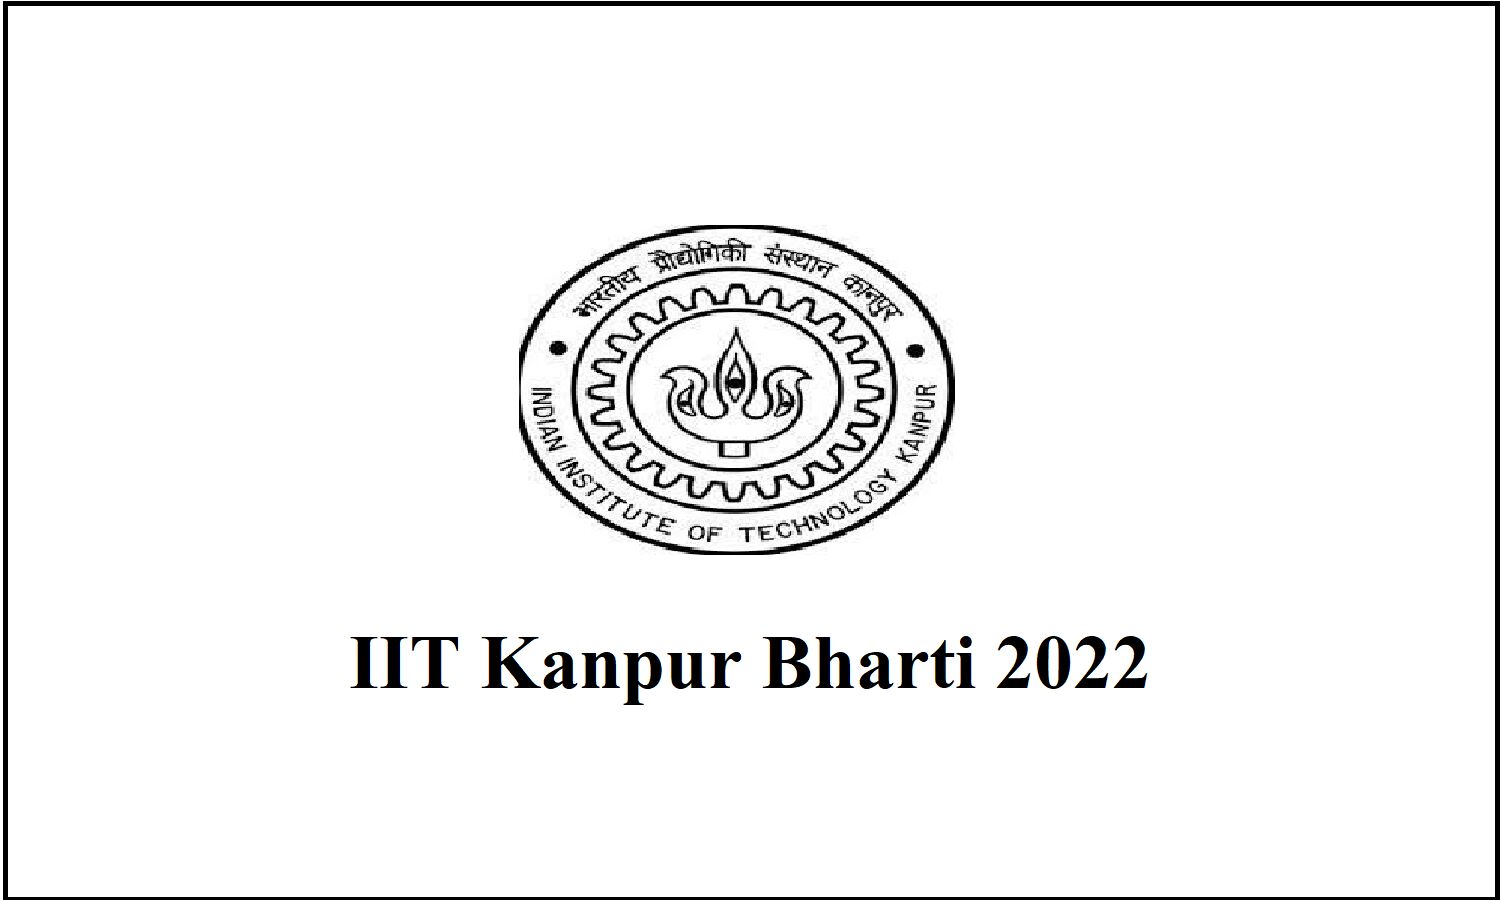 IIT Madras Vs IIT Kanpur, M.Tech Courses, Placements, GATE Cutoff